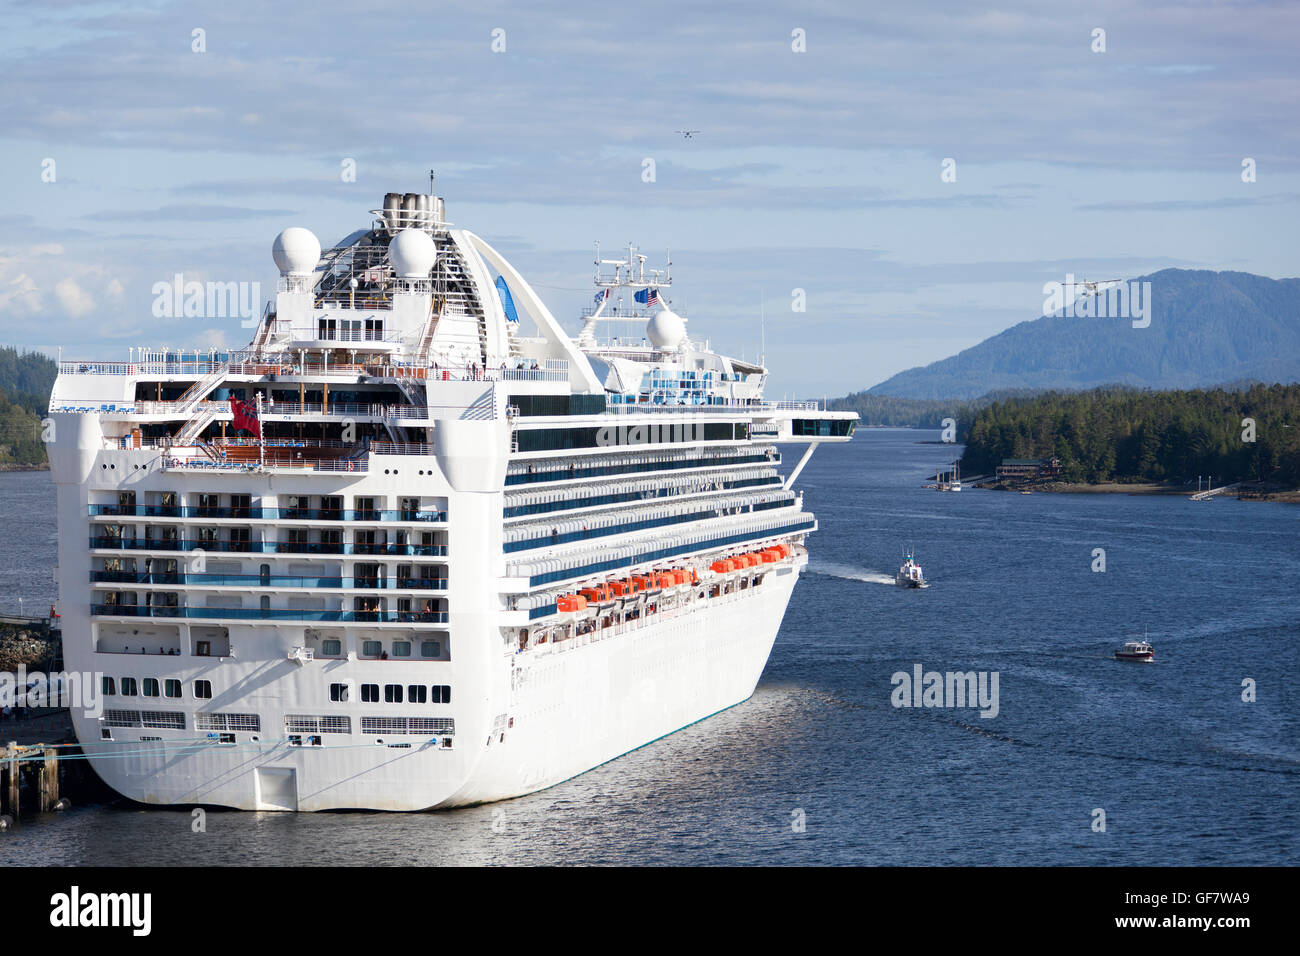 Planes and small boats passing by the docked cruise ship in Ketchikan (Alaska). Stock Photo